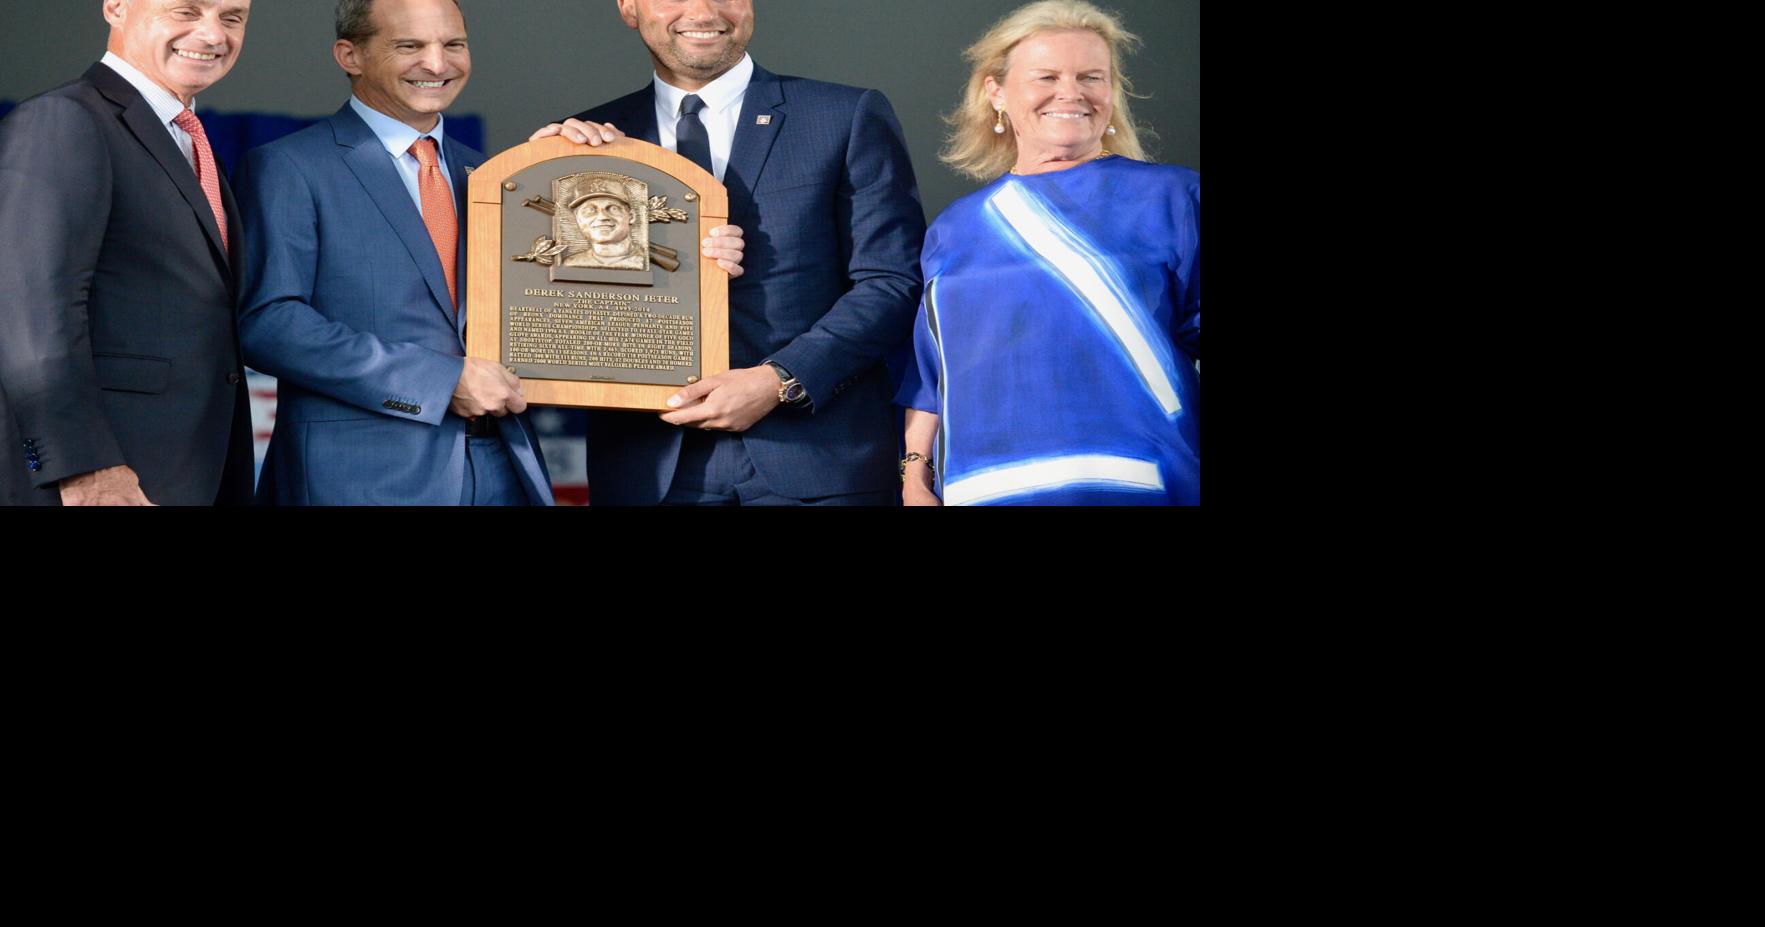 Derek Jeter's Hall of Fame induction was moment for family